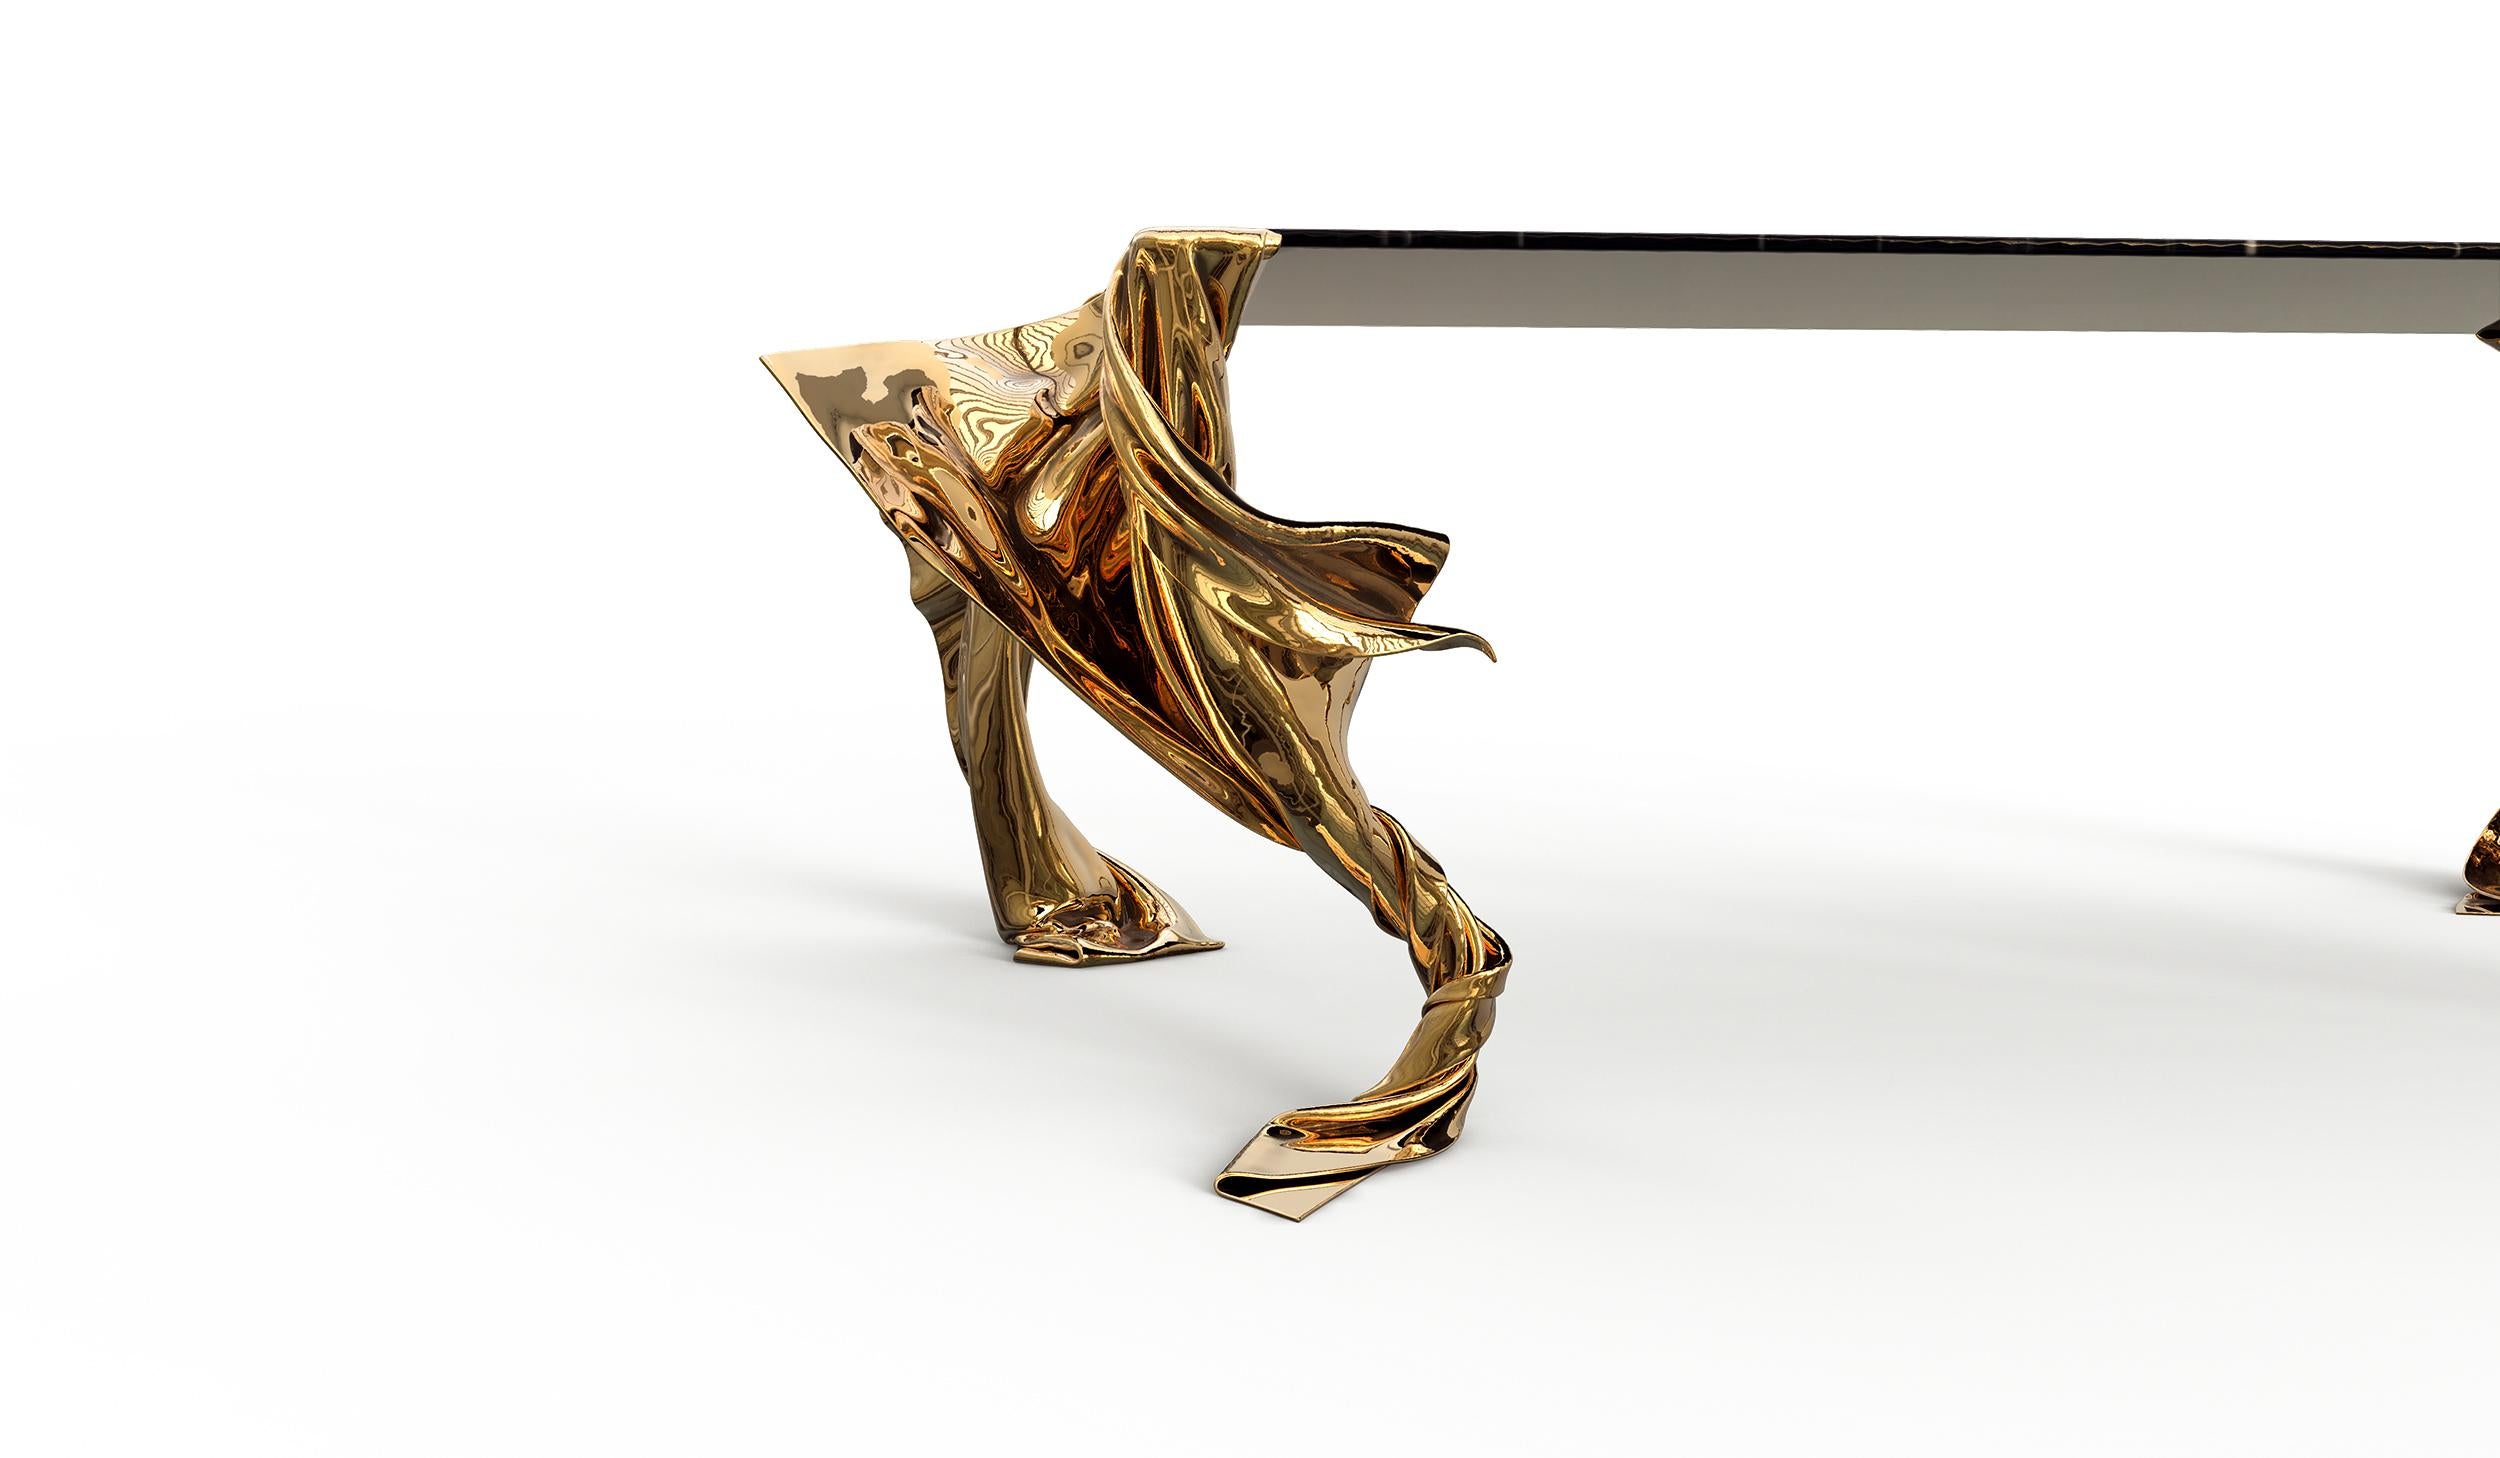 The Volante Dining Table, a distinguished piece from the Levitaz Collection, artfully combines the timeless elegance of marble with the sculptural beauty of cast bronze. The table's legs are a testament to fluid design, as bronze is transformed to